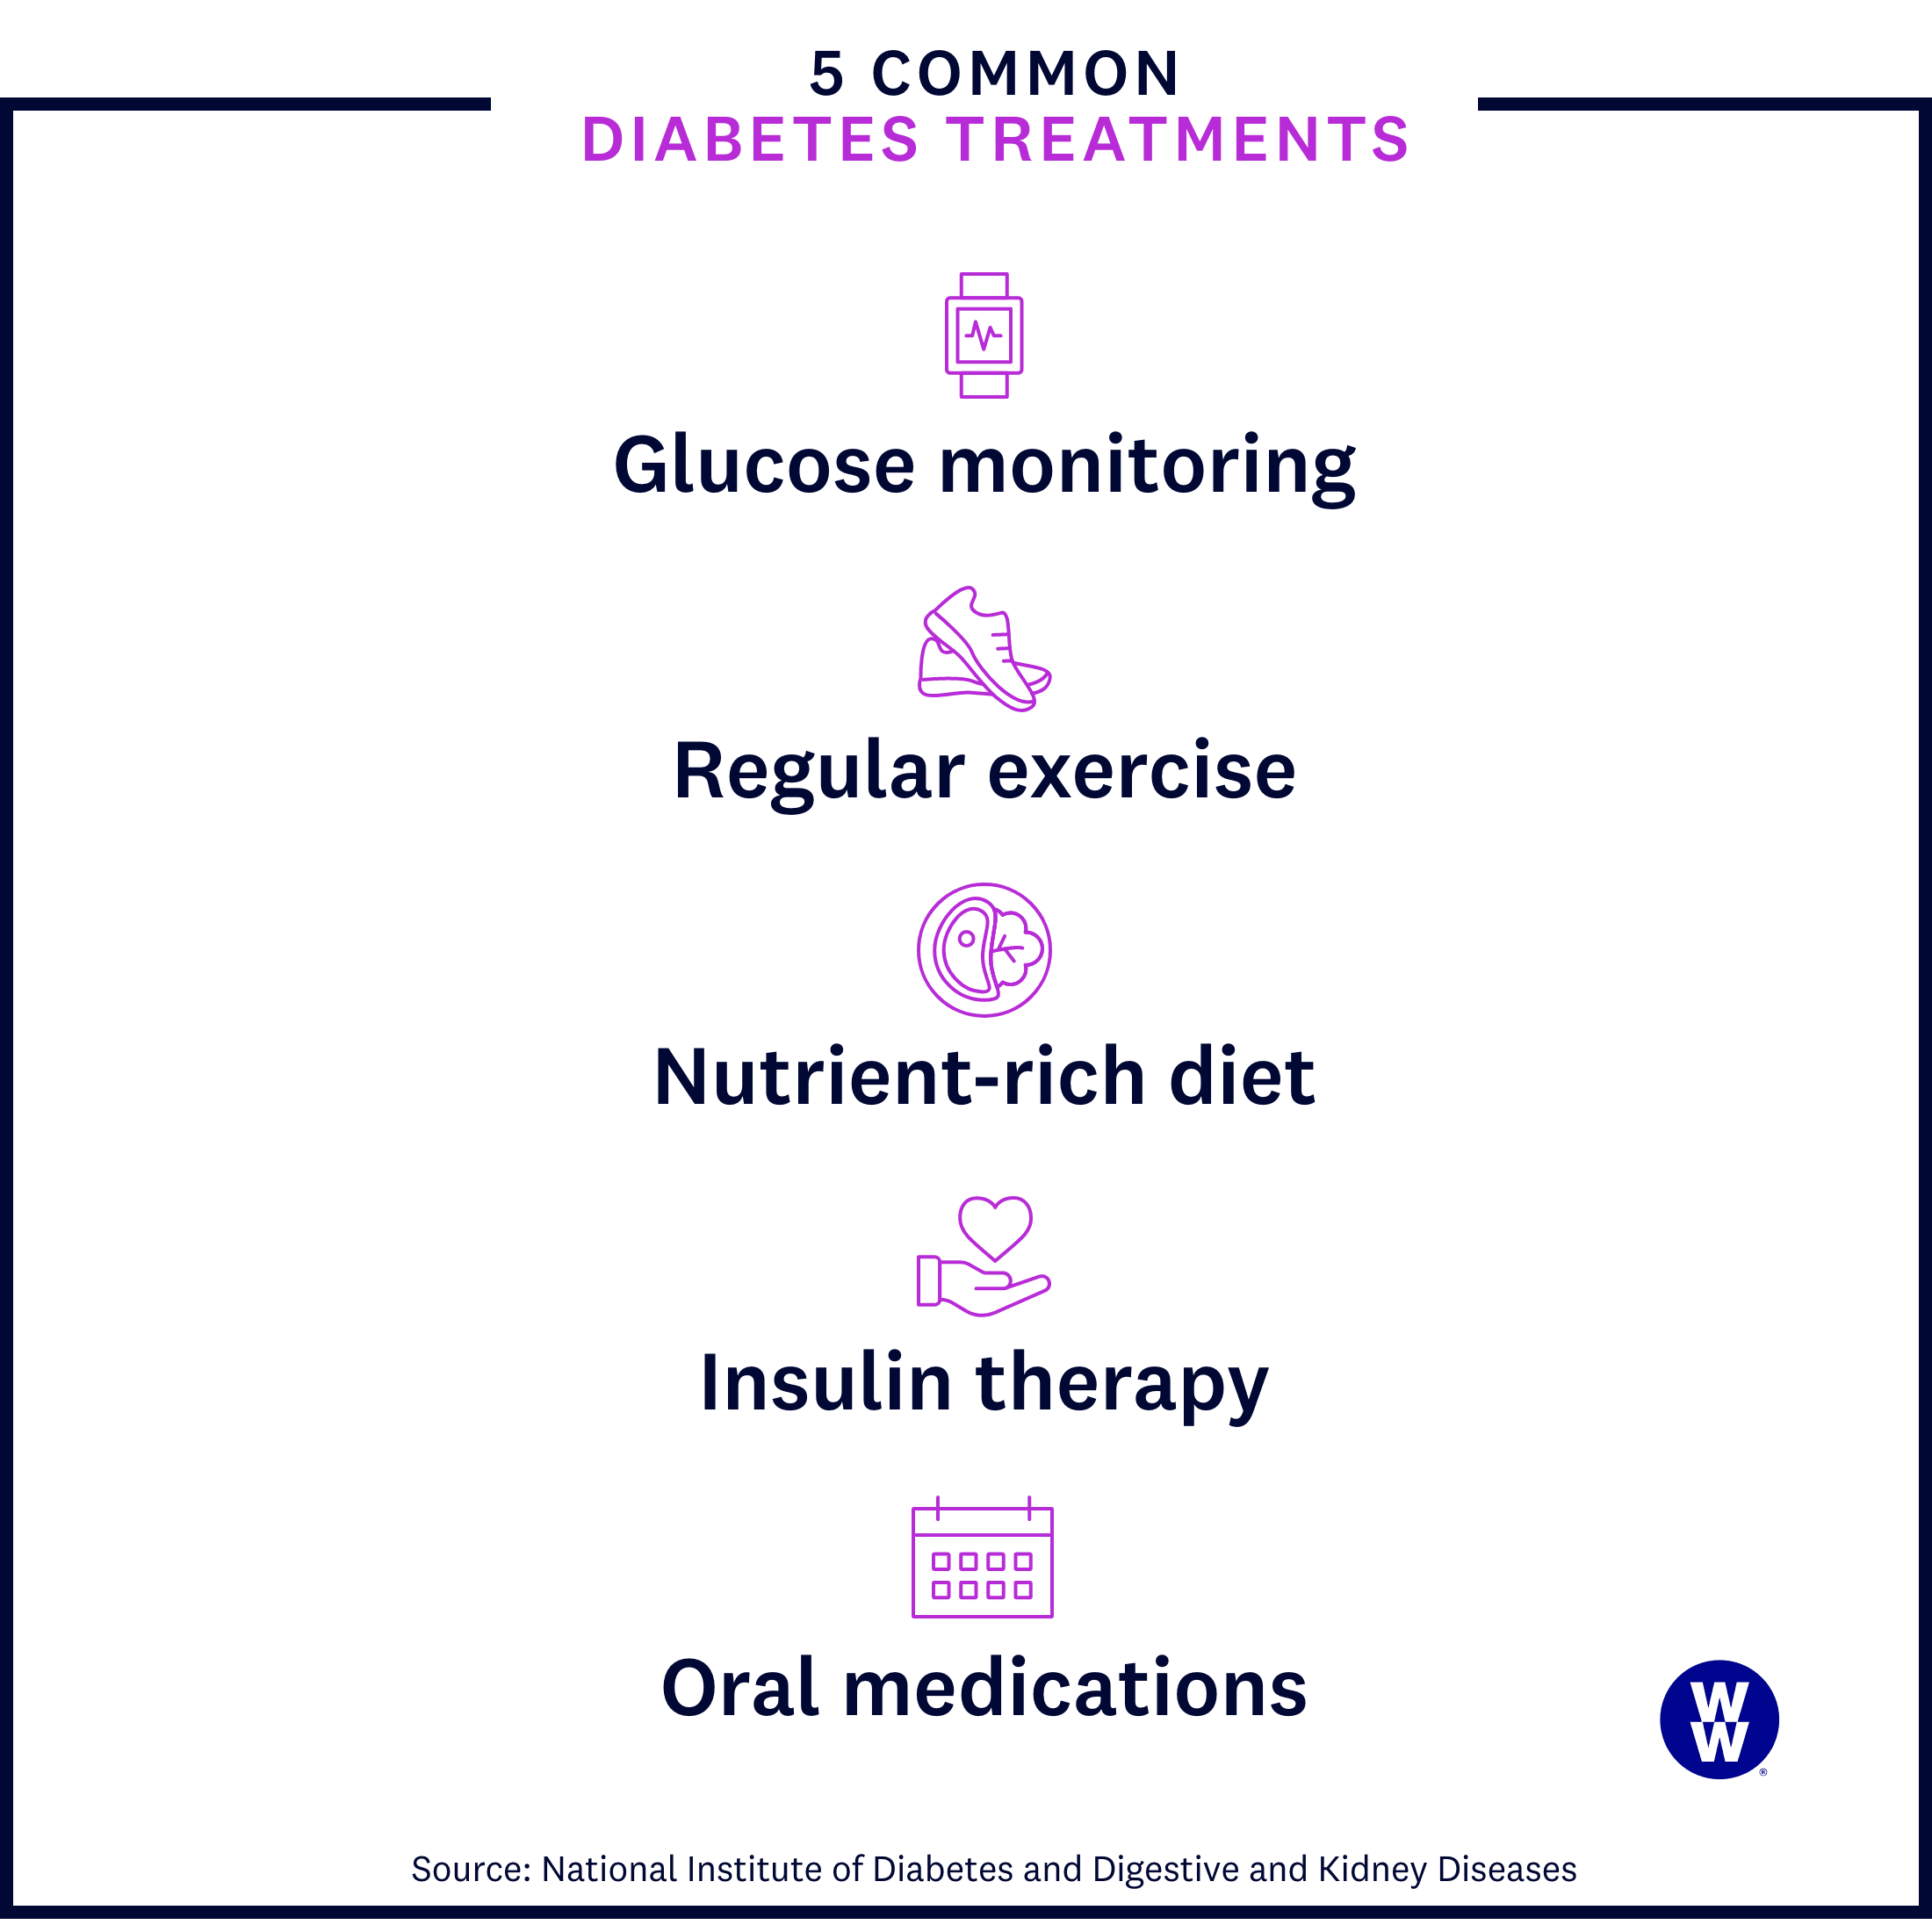 Common diabetes treatments: glucose monitoring, exercise, nutrient-rich diet, insulin therapy, oral medication